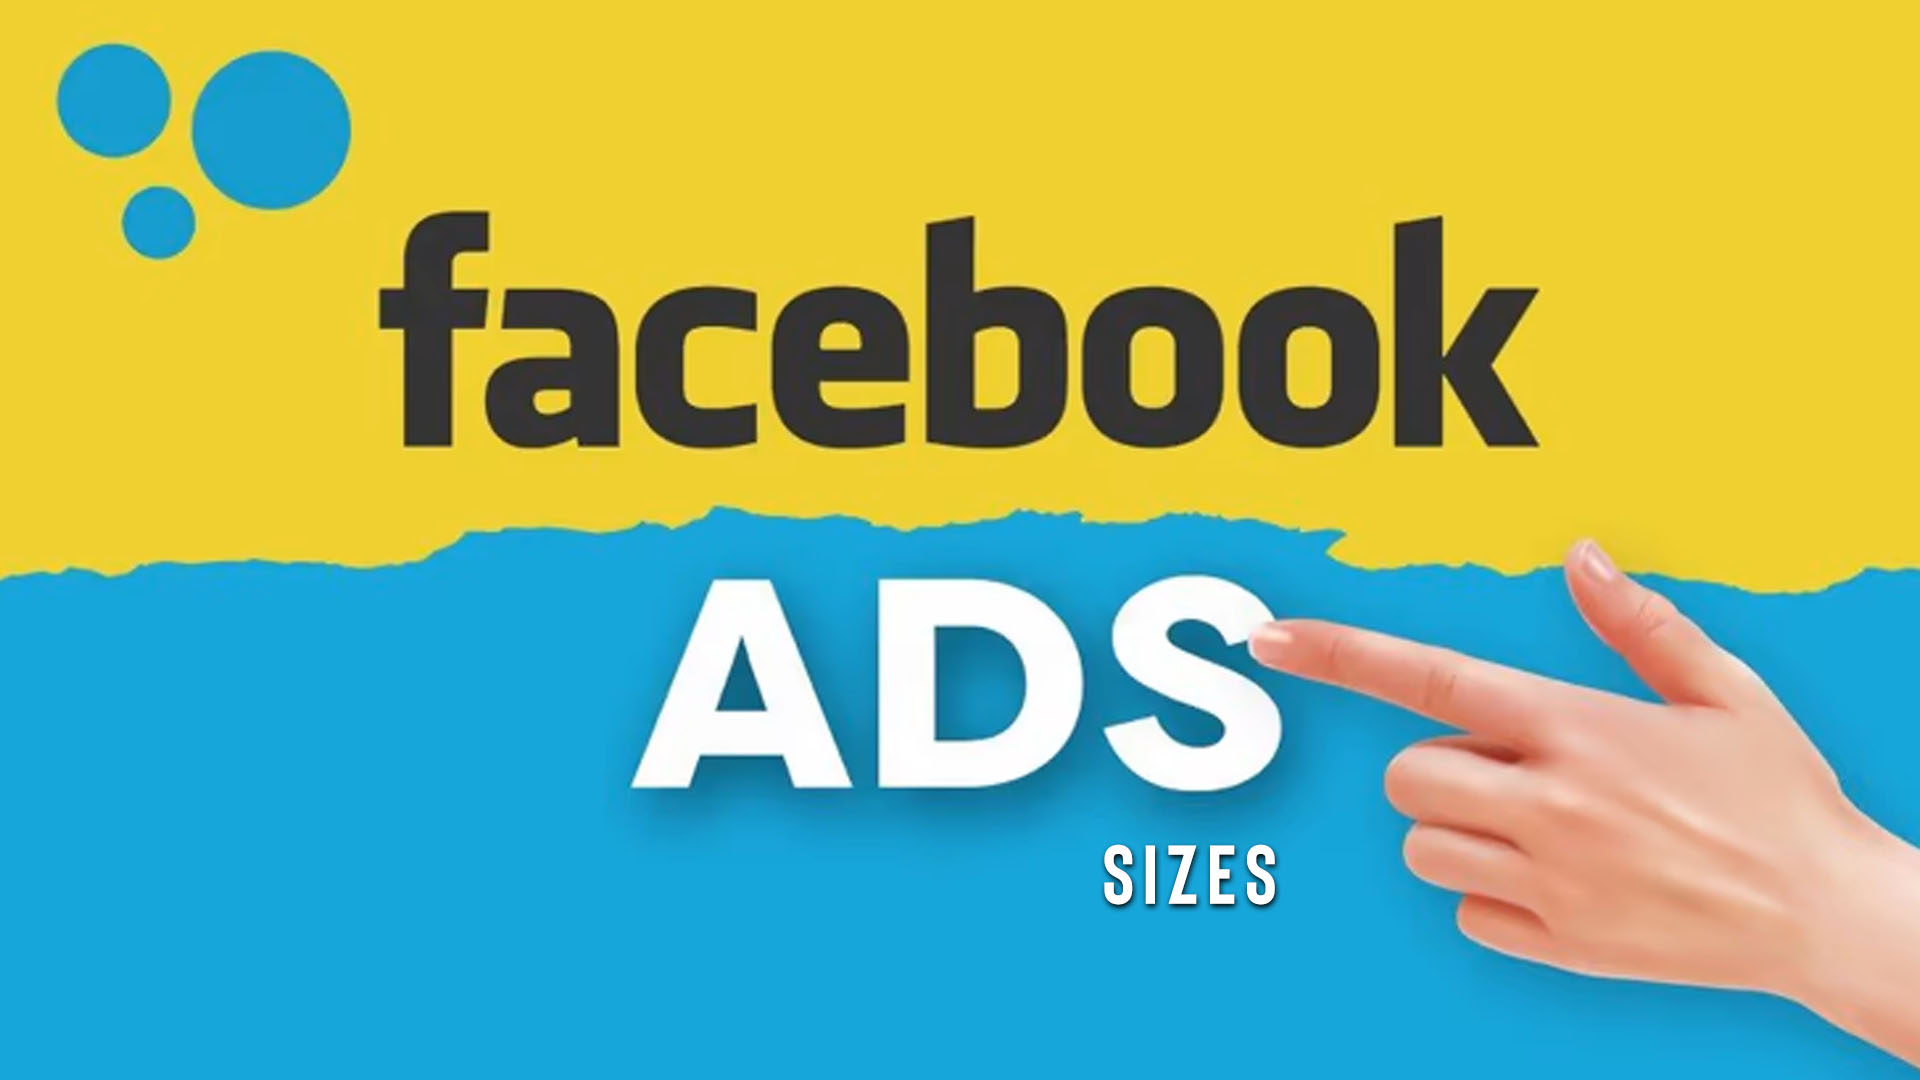 Facebook Sizes for Ads